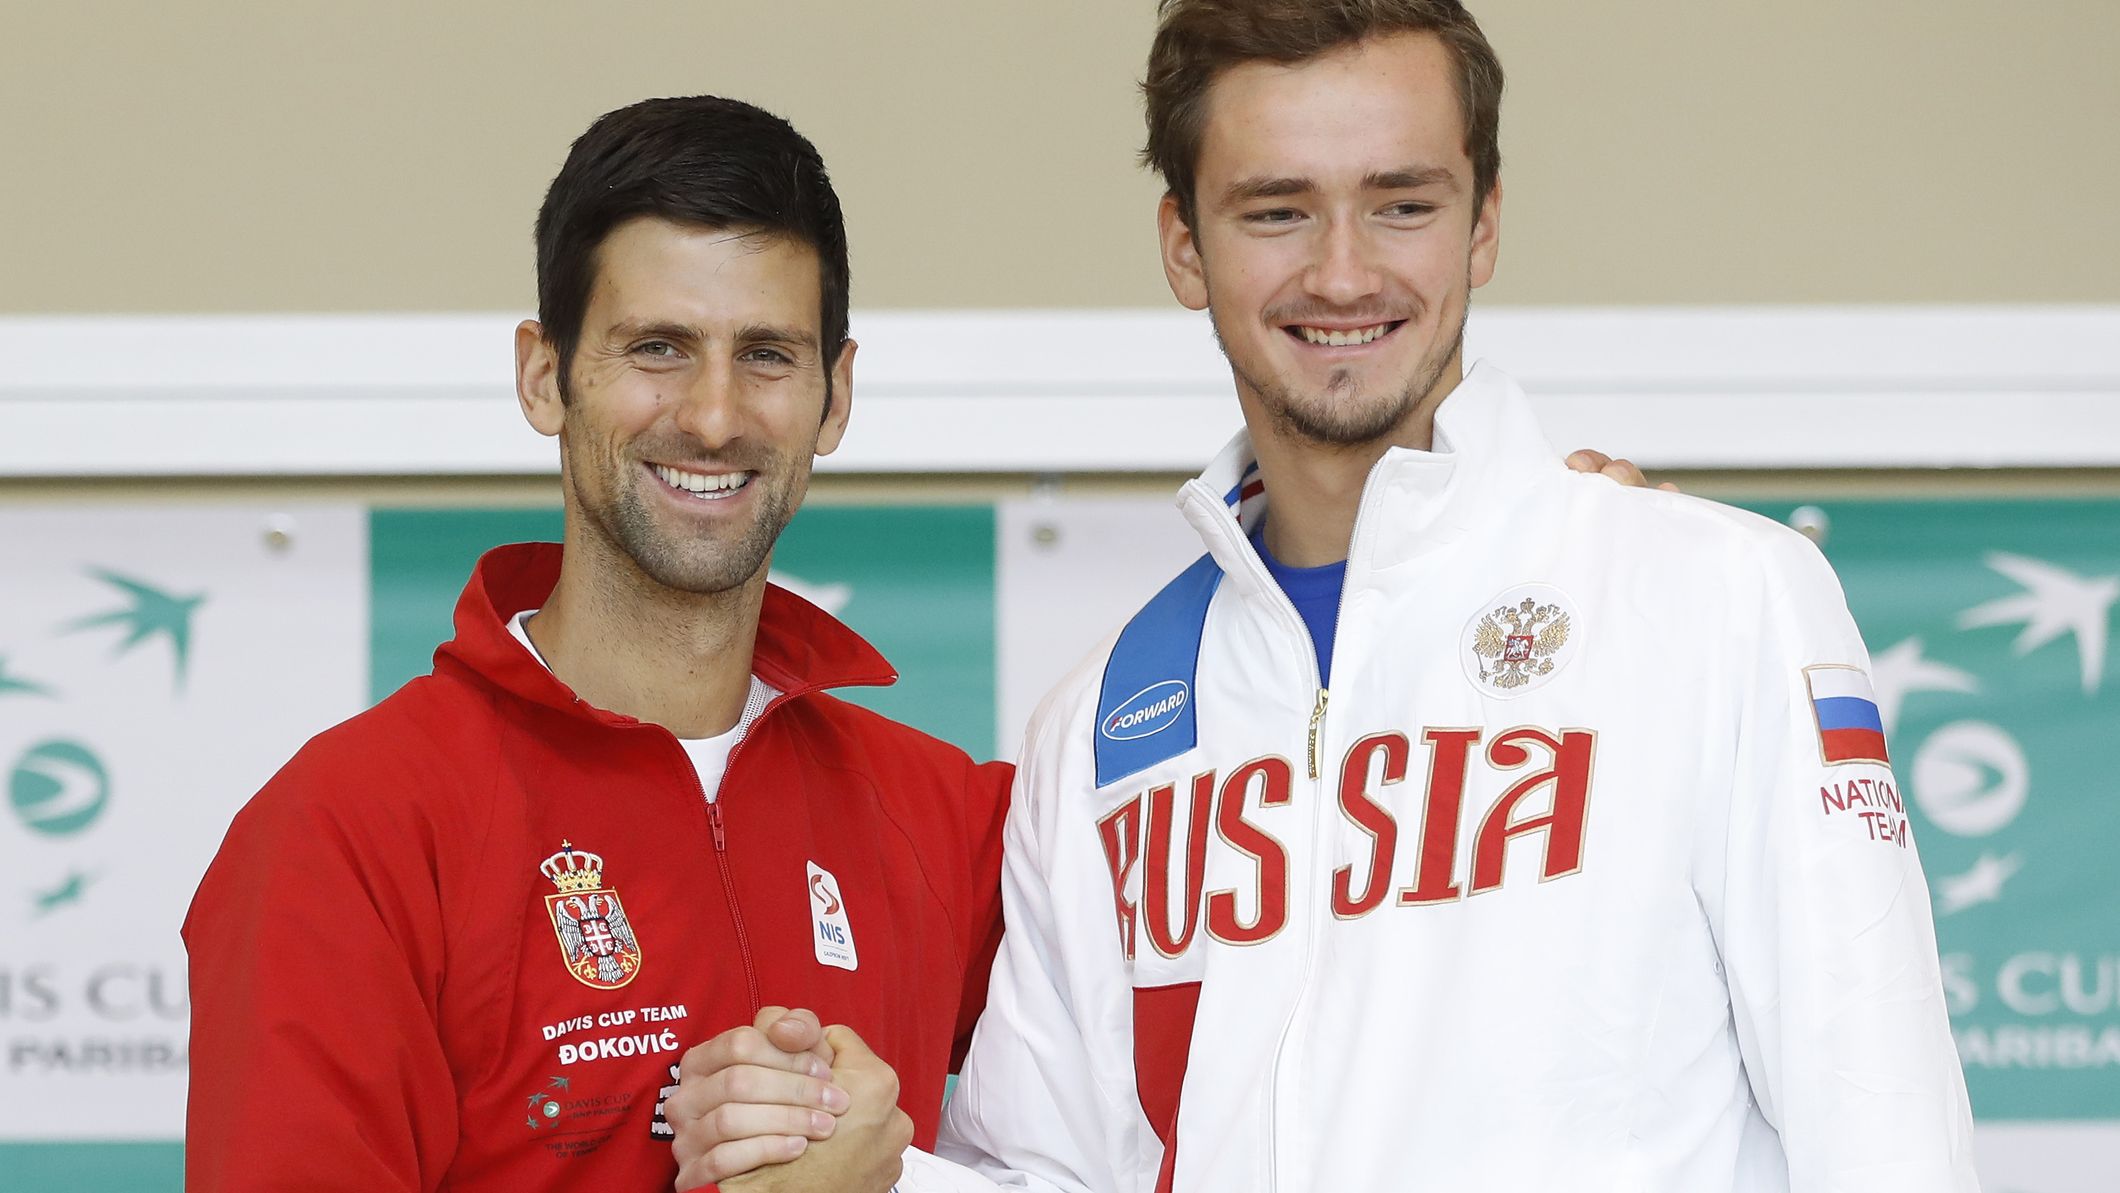 Davis Cup team player Novak Djokovic (left) shakes hands with Daniil Medvedev, 20, during the official draw ceremony ahead of the World Group Davis Cup tie between Serbia and Russia in 2017.